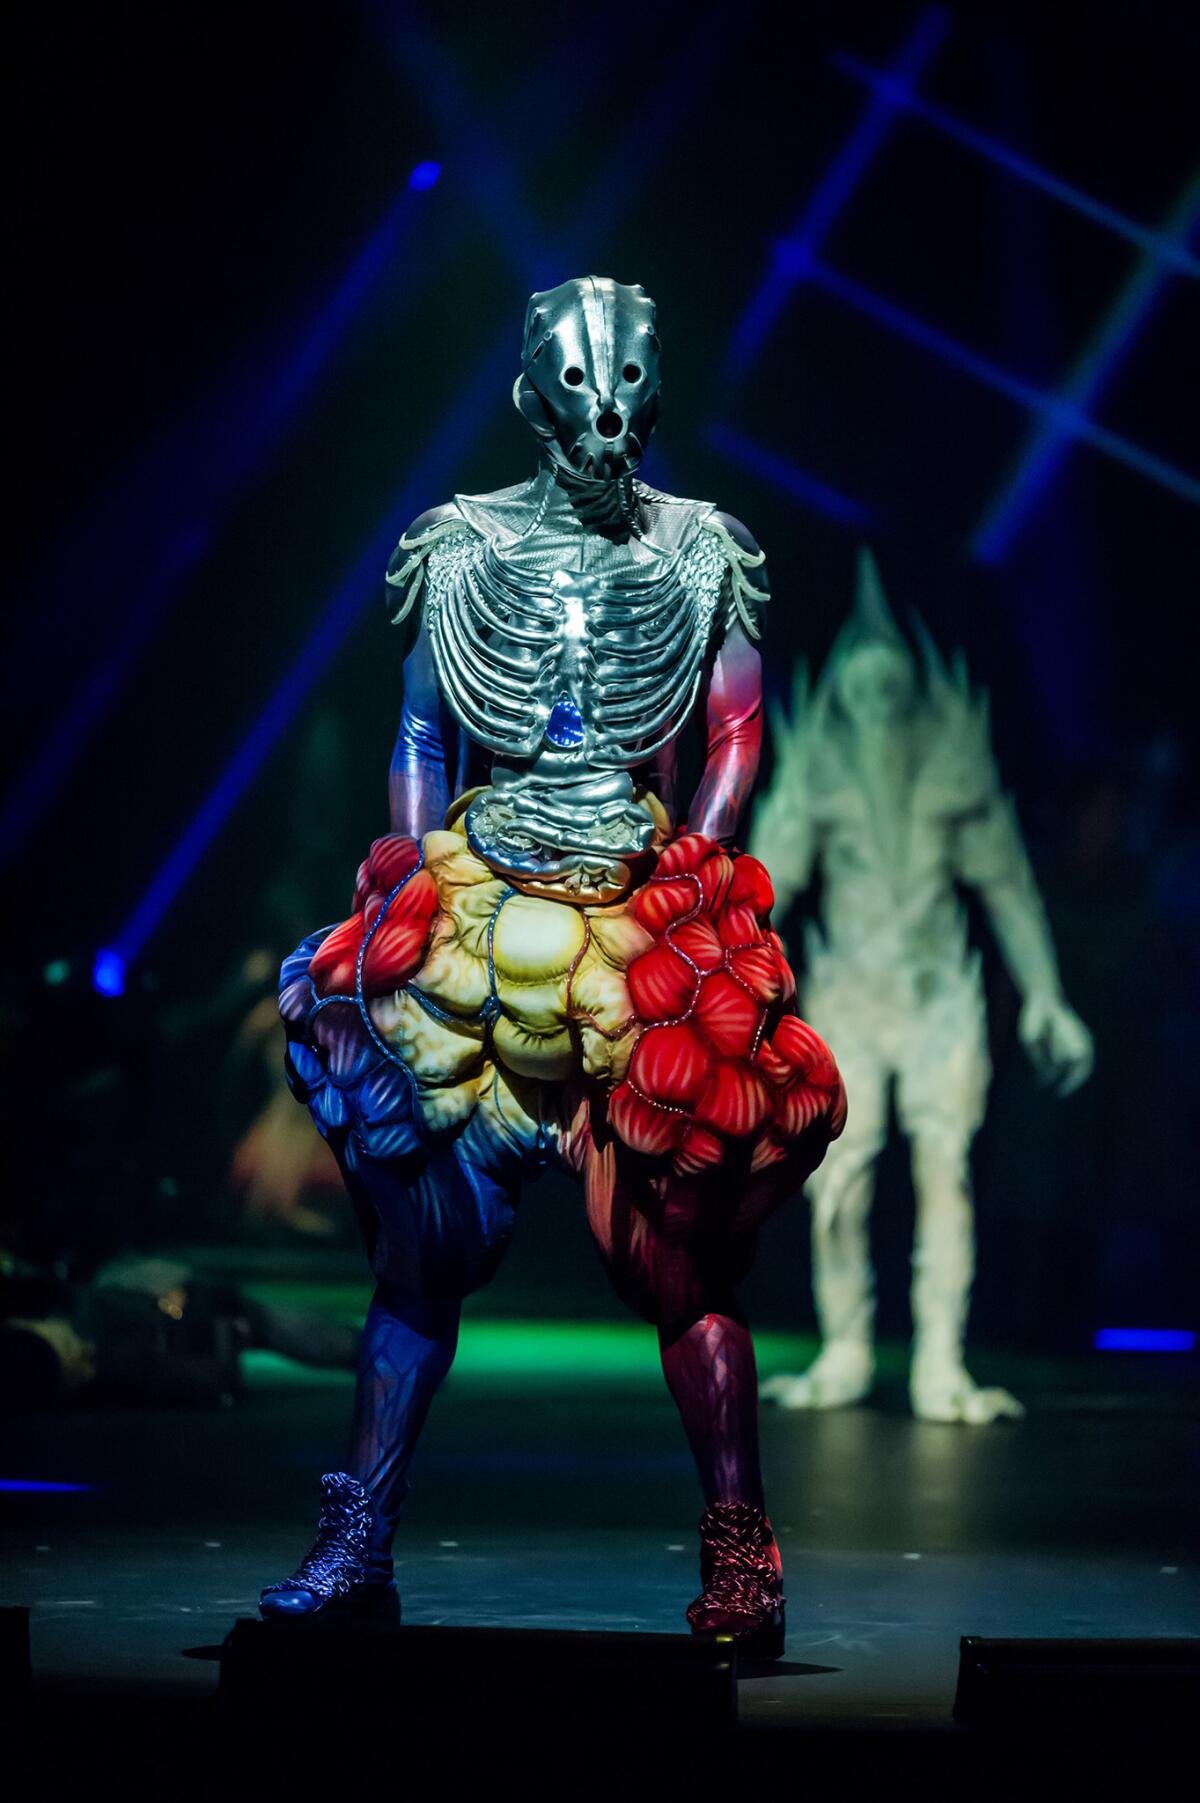 The Organ Farmer, by Fifi Colston, at the 2017 World of WearableArt